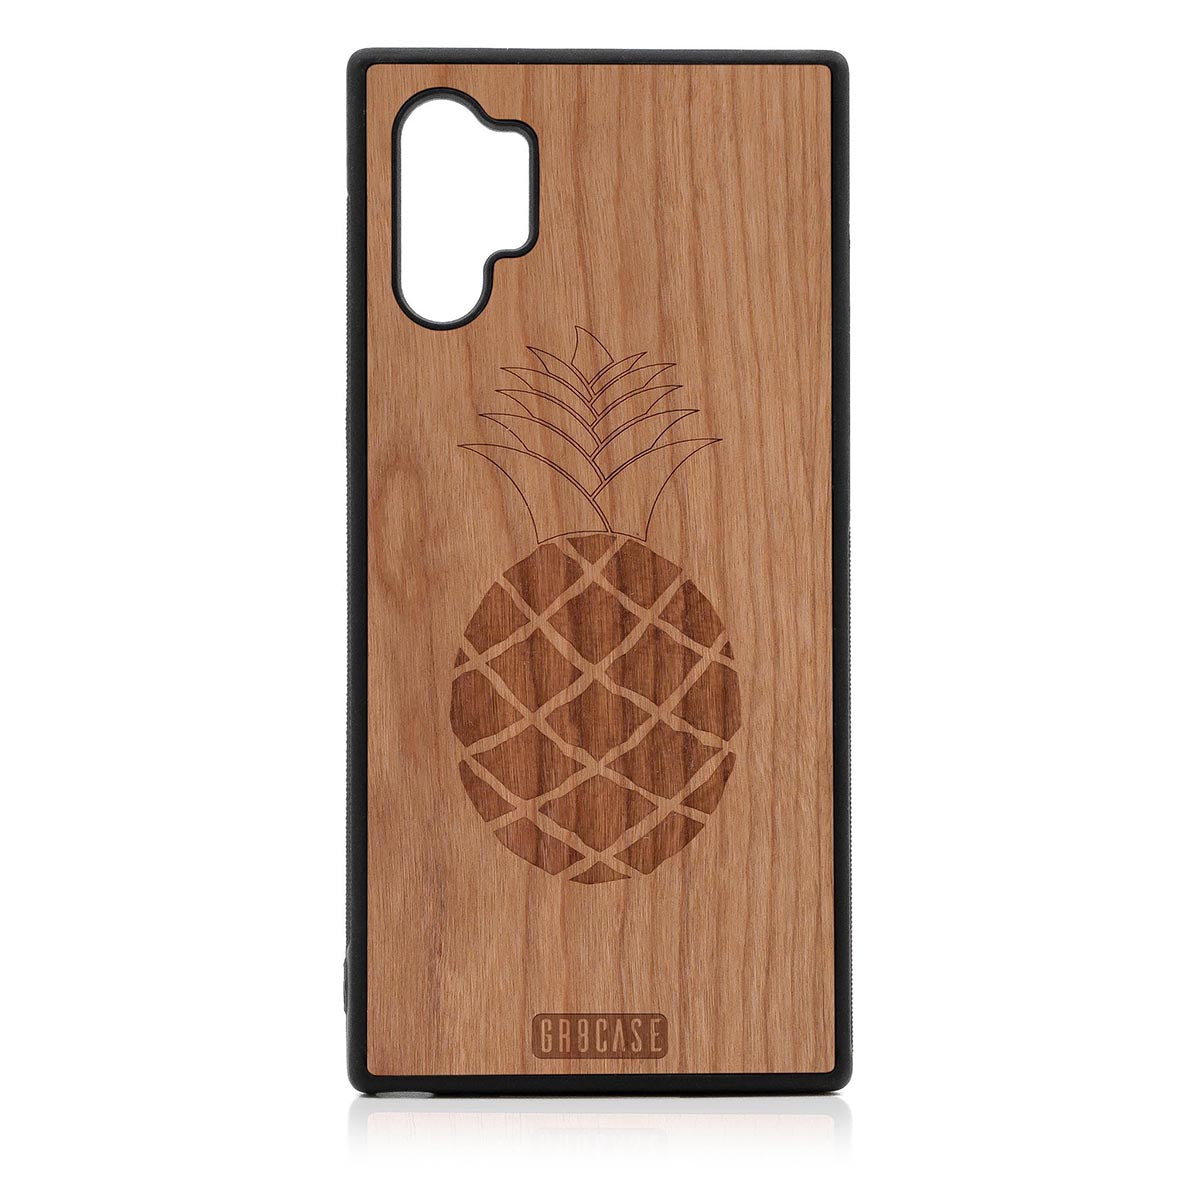 Pineapple Design Wood Case Samsung Galaxy Note 10 Plus by GR8CASE